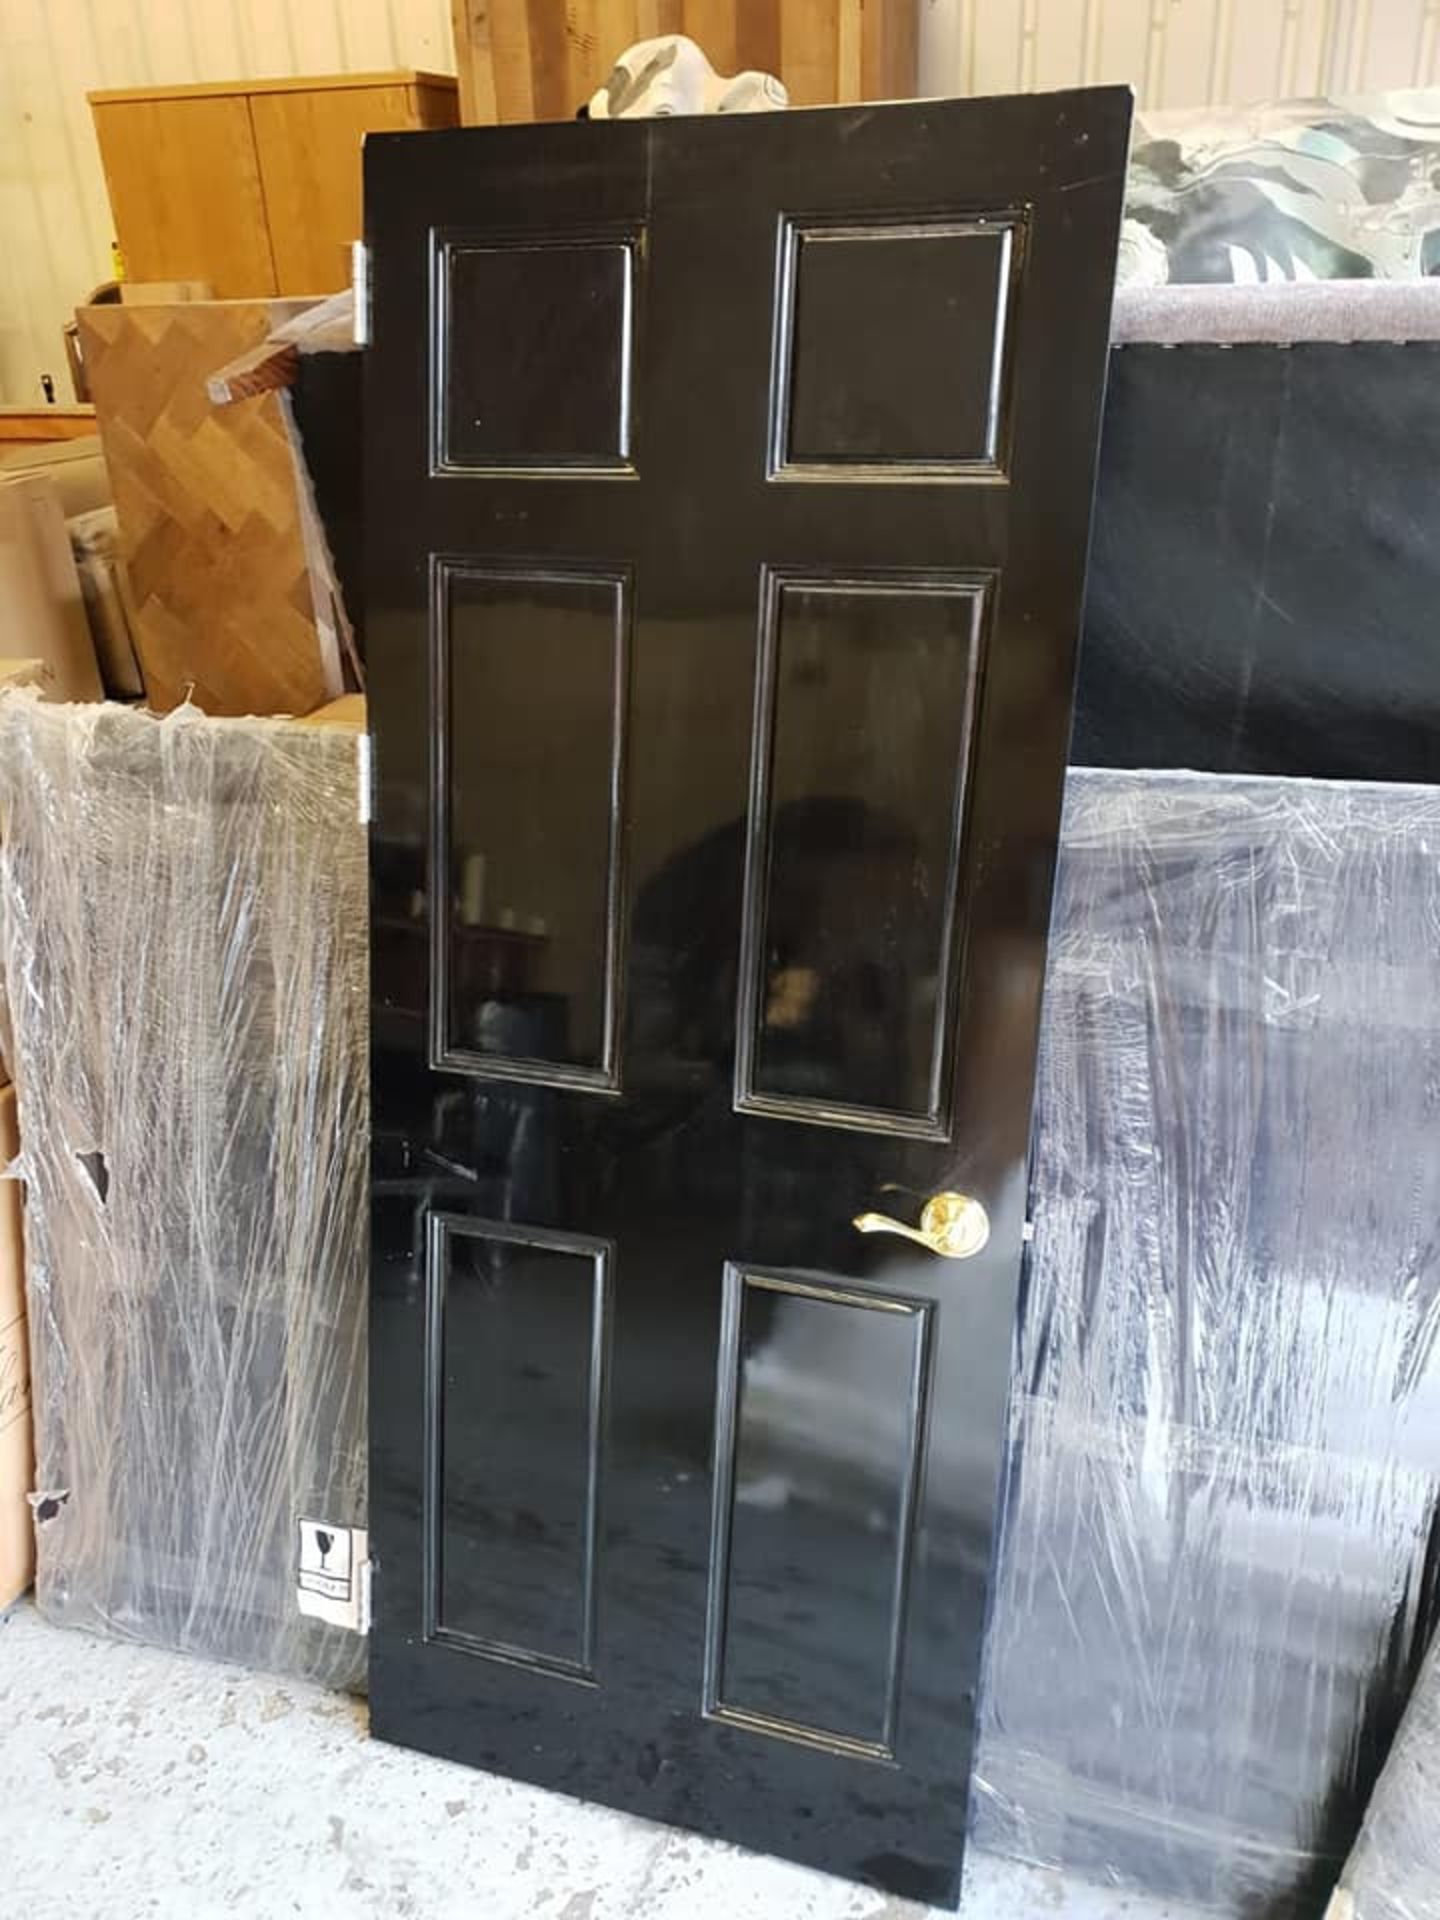 A Pair Of Sussex Style 40mm thick Gloss Black Interior Doors Complete With Ironmongery 82 x 203 cm - Image 2 of 4